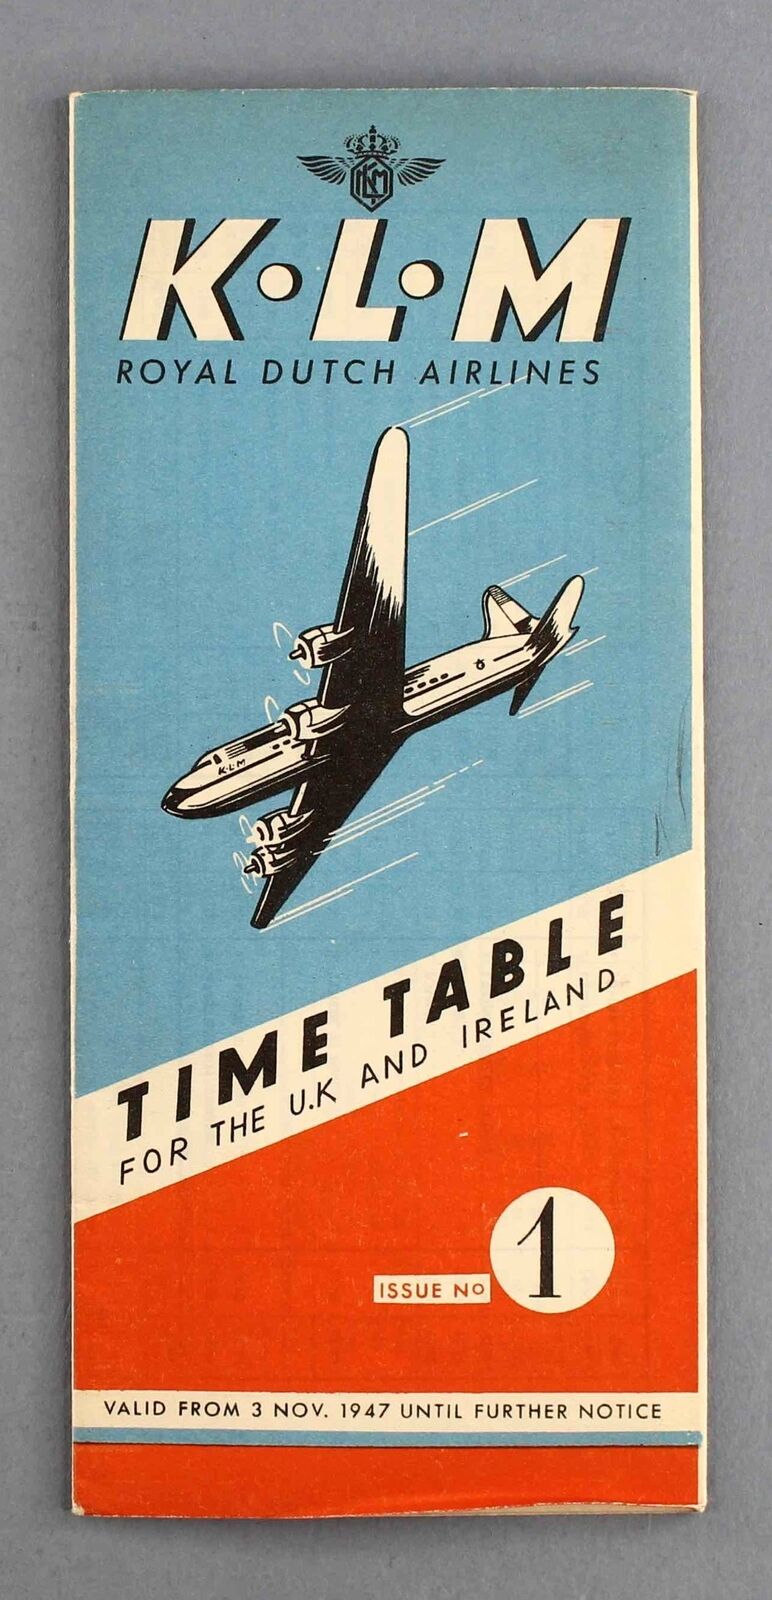 KLM TIMETABLE NOVEMBER 1947 UK & IRELAND AIRLINE SCHEDULE ROYAL DUTCH AIRLINES